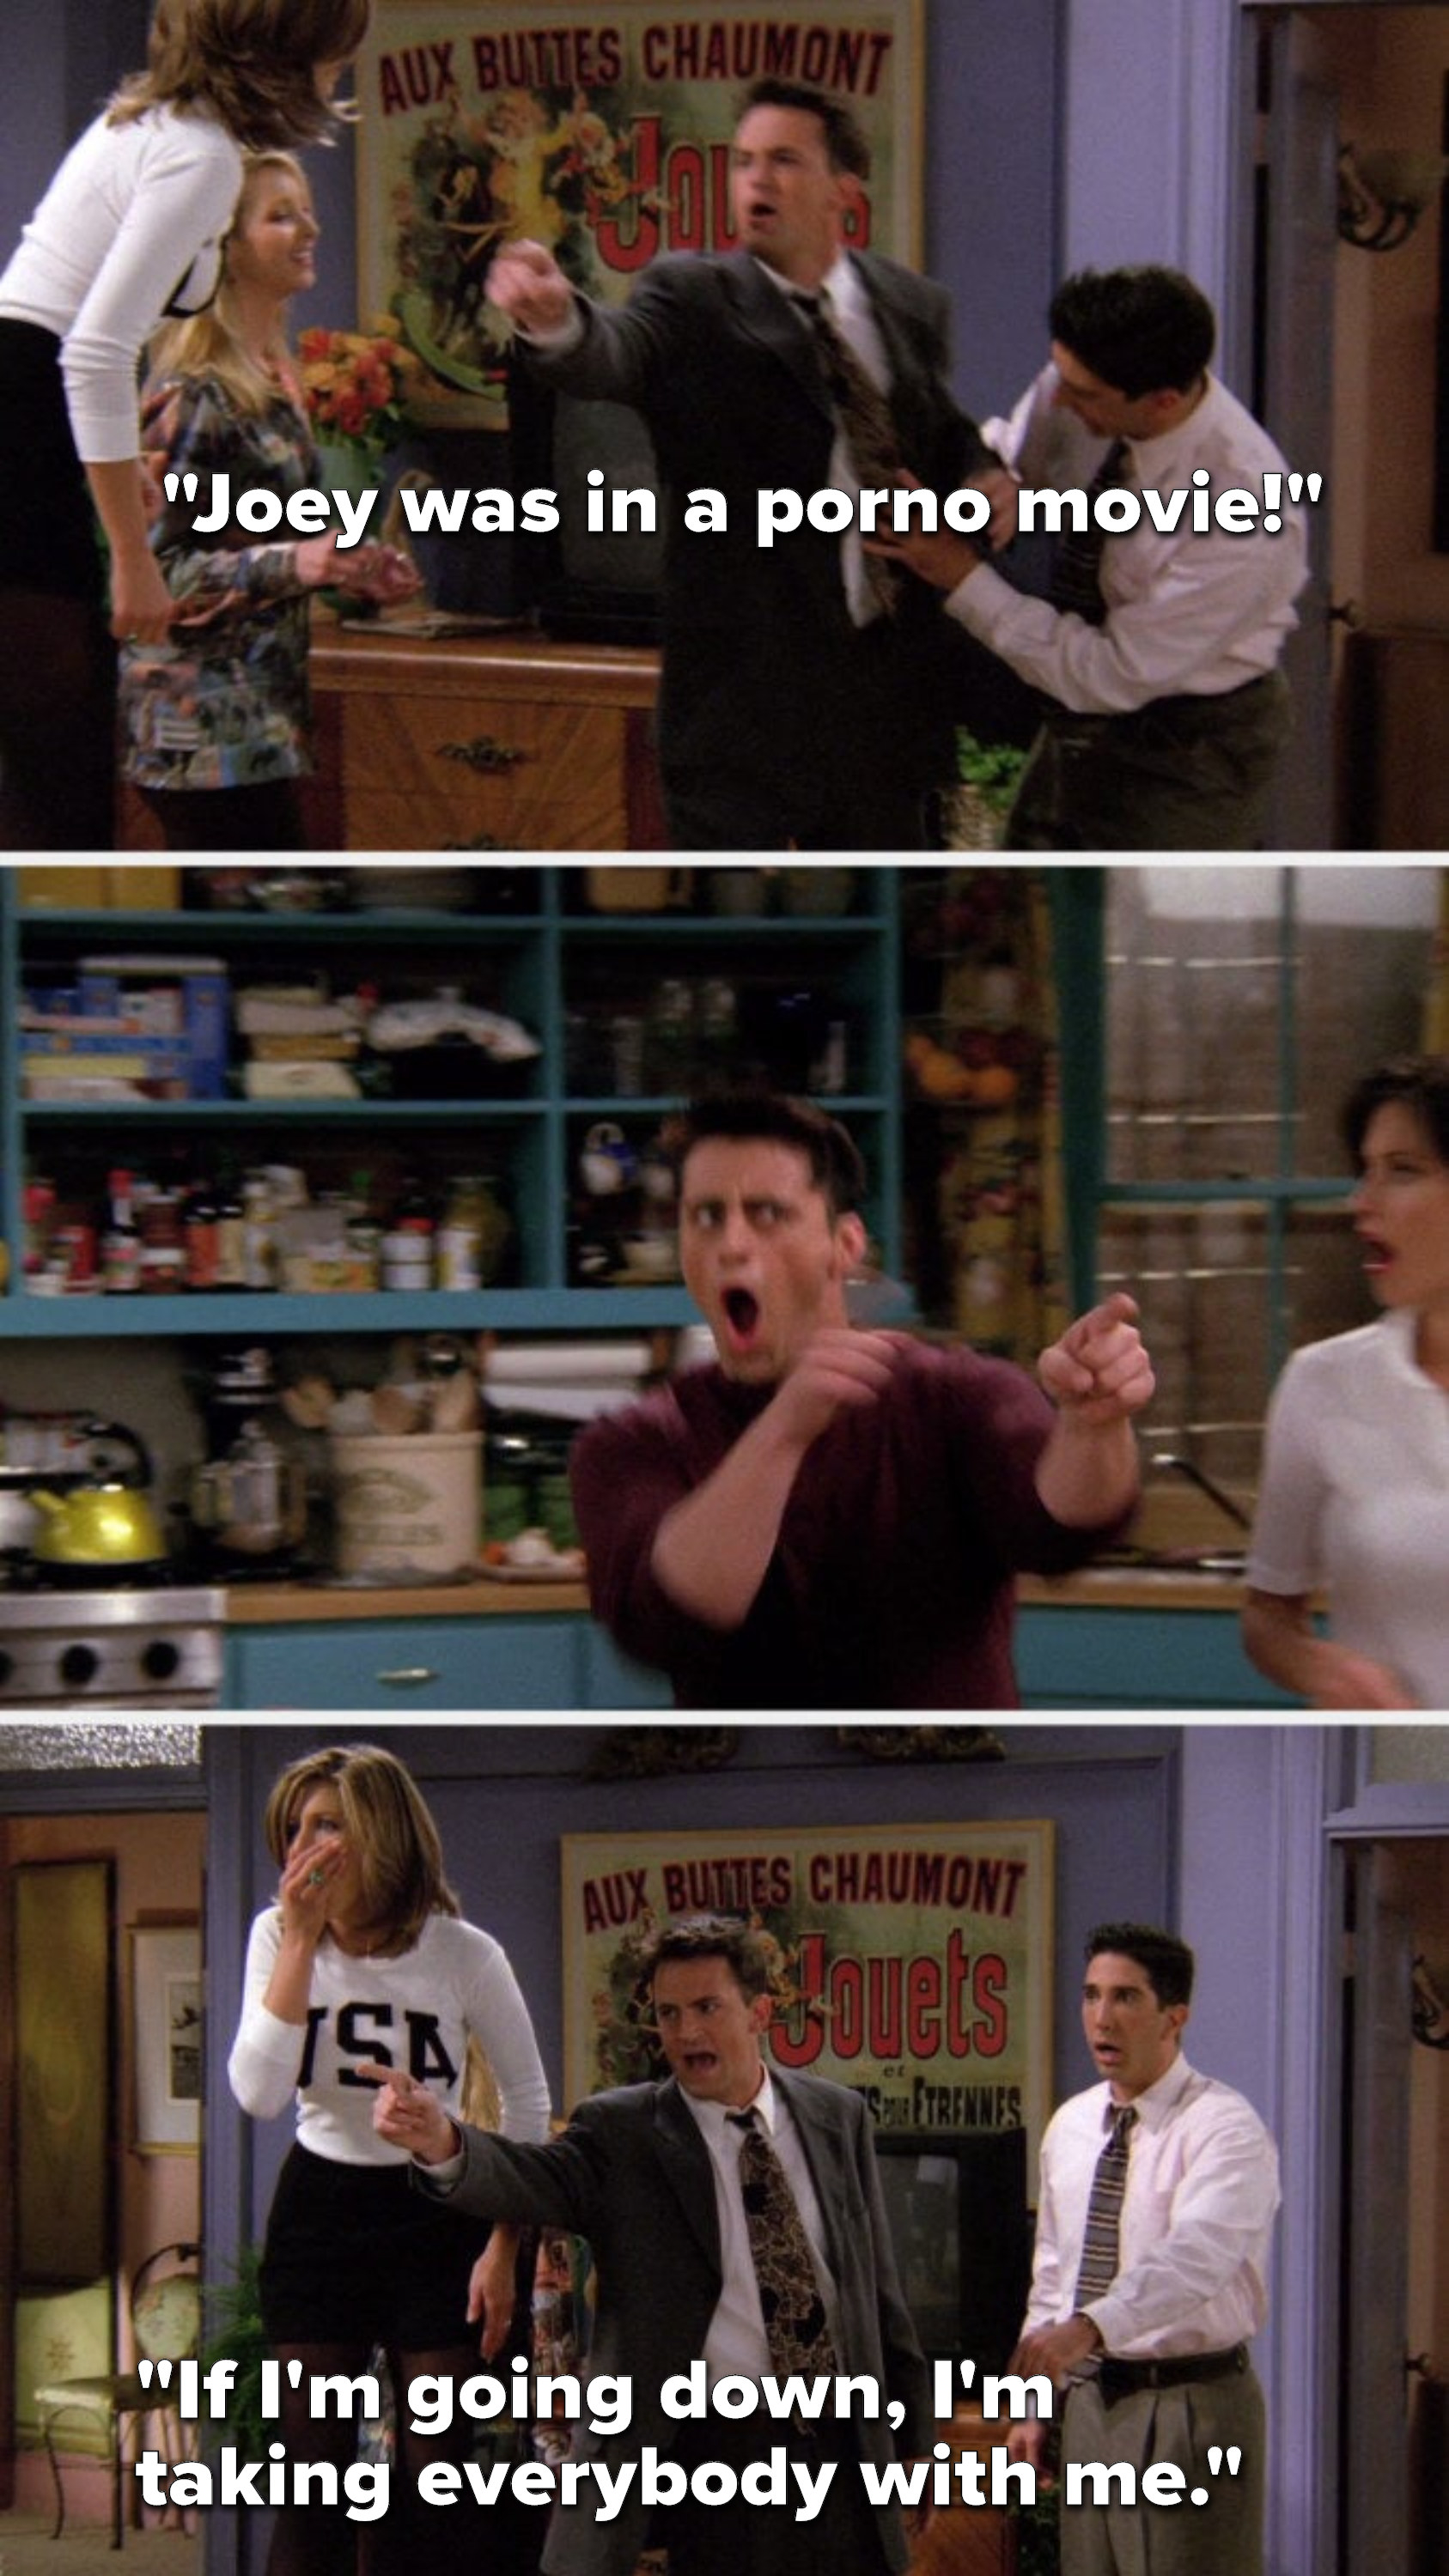 Chandler yells, Joey was in a porno movie, everybody gasps, and Chandler says, If Im going down, Im taking everybody with me